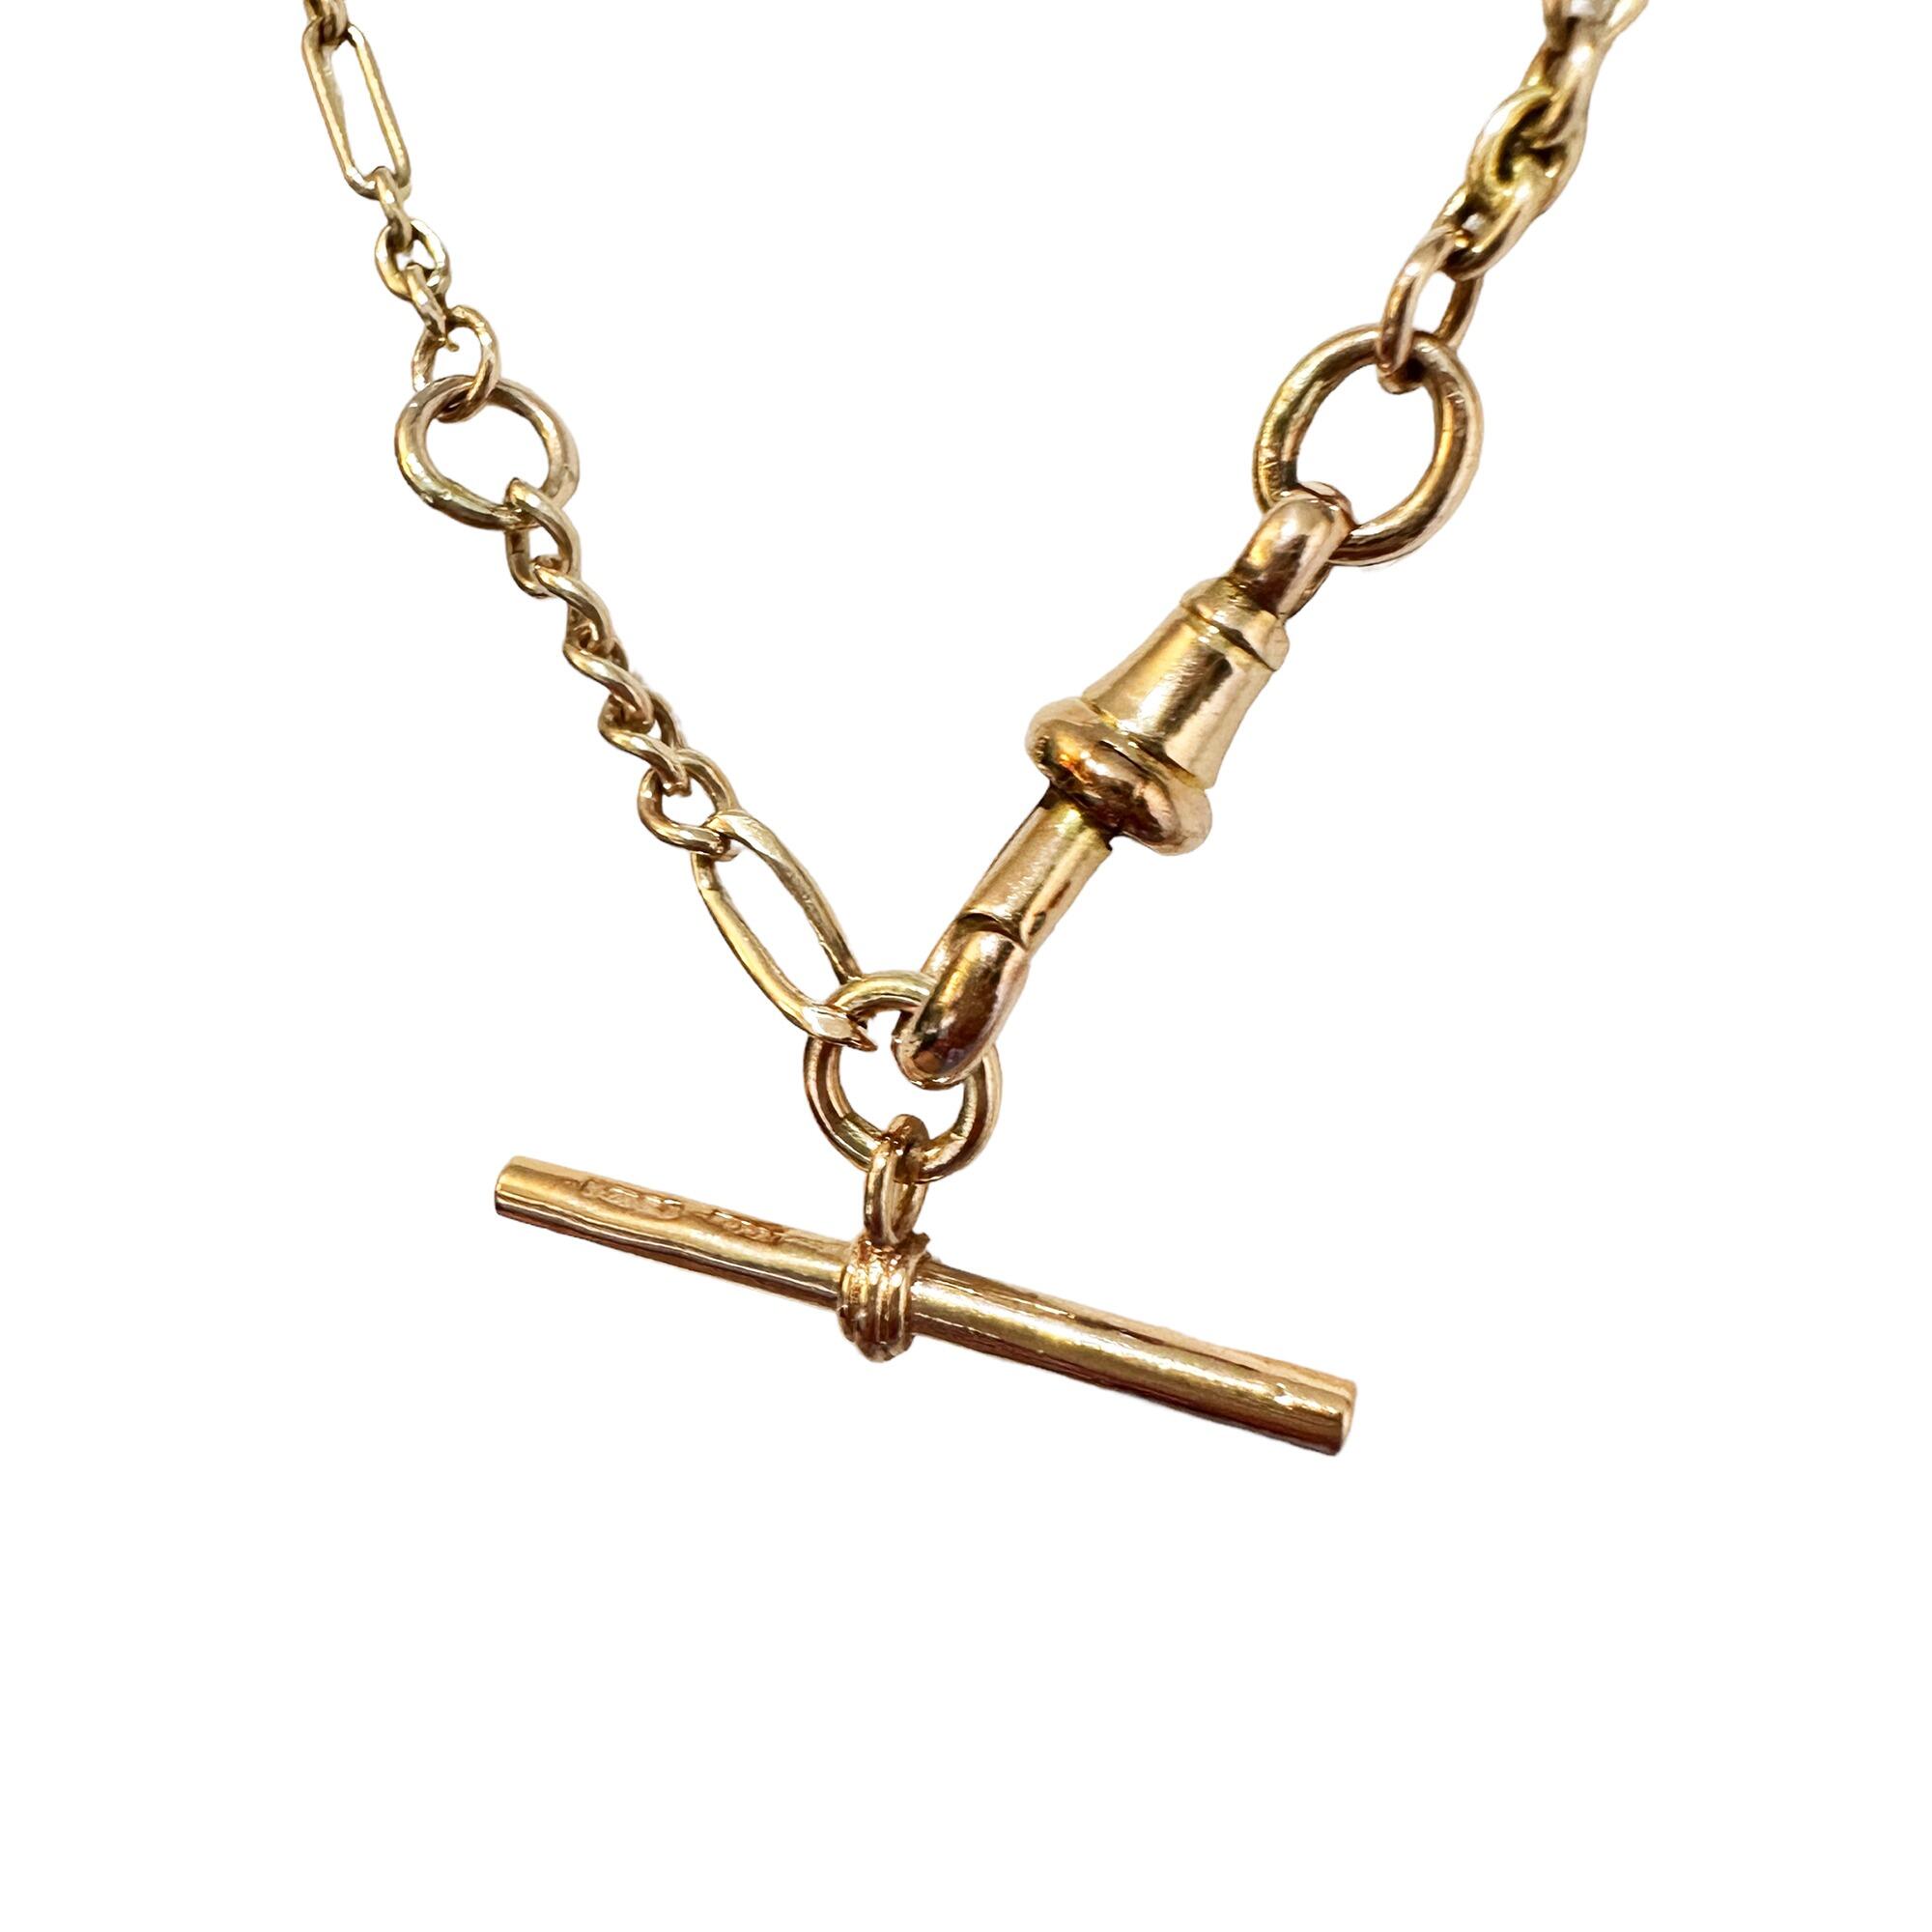 SOLD - Edwardian 9ct Gold Fetter link chain with t-bar & dog clip ...